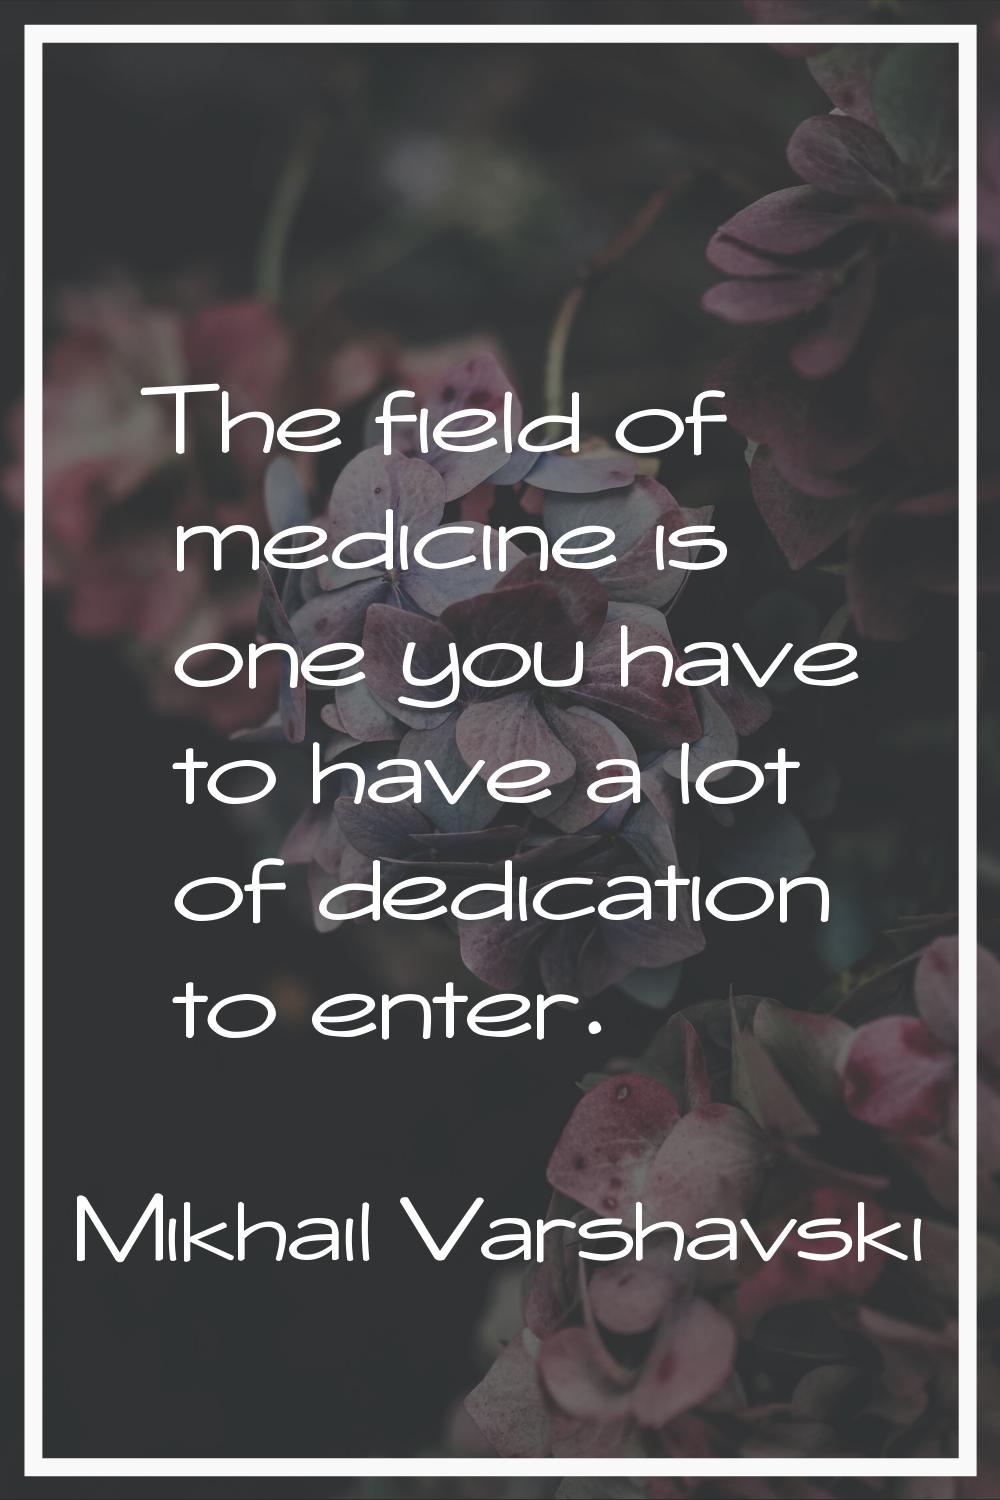 The field of medicine is one you have to have a lot of dedication to enter.